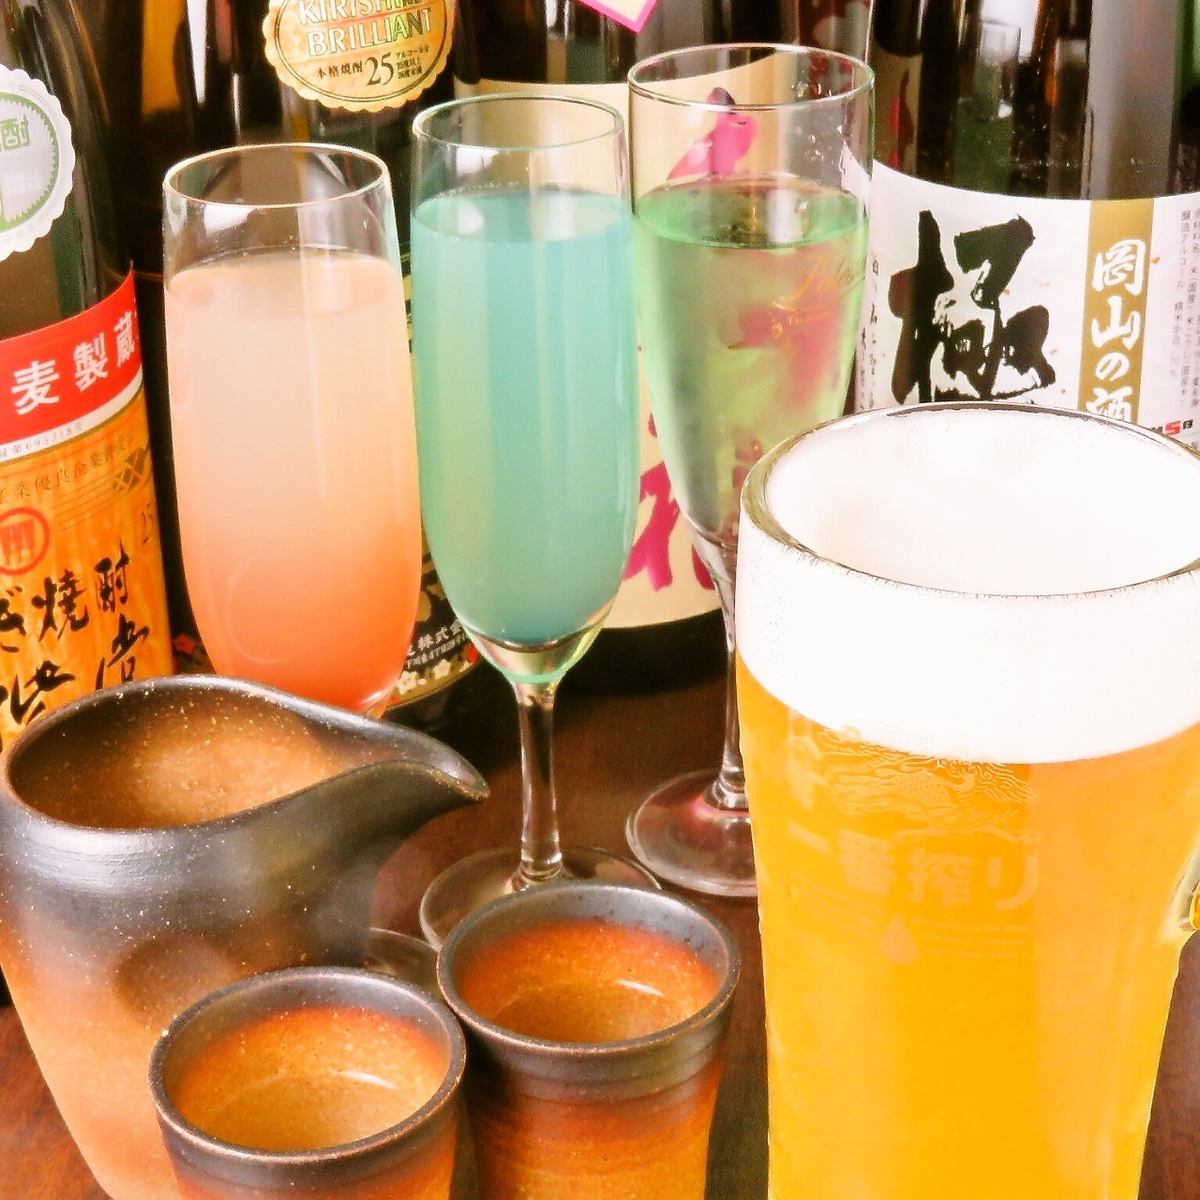 We offer an all-you-can-drink option! Same-day reservations are also available! Have a great time at Uo-Ro-Hachi!